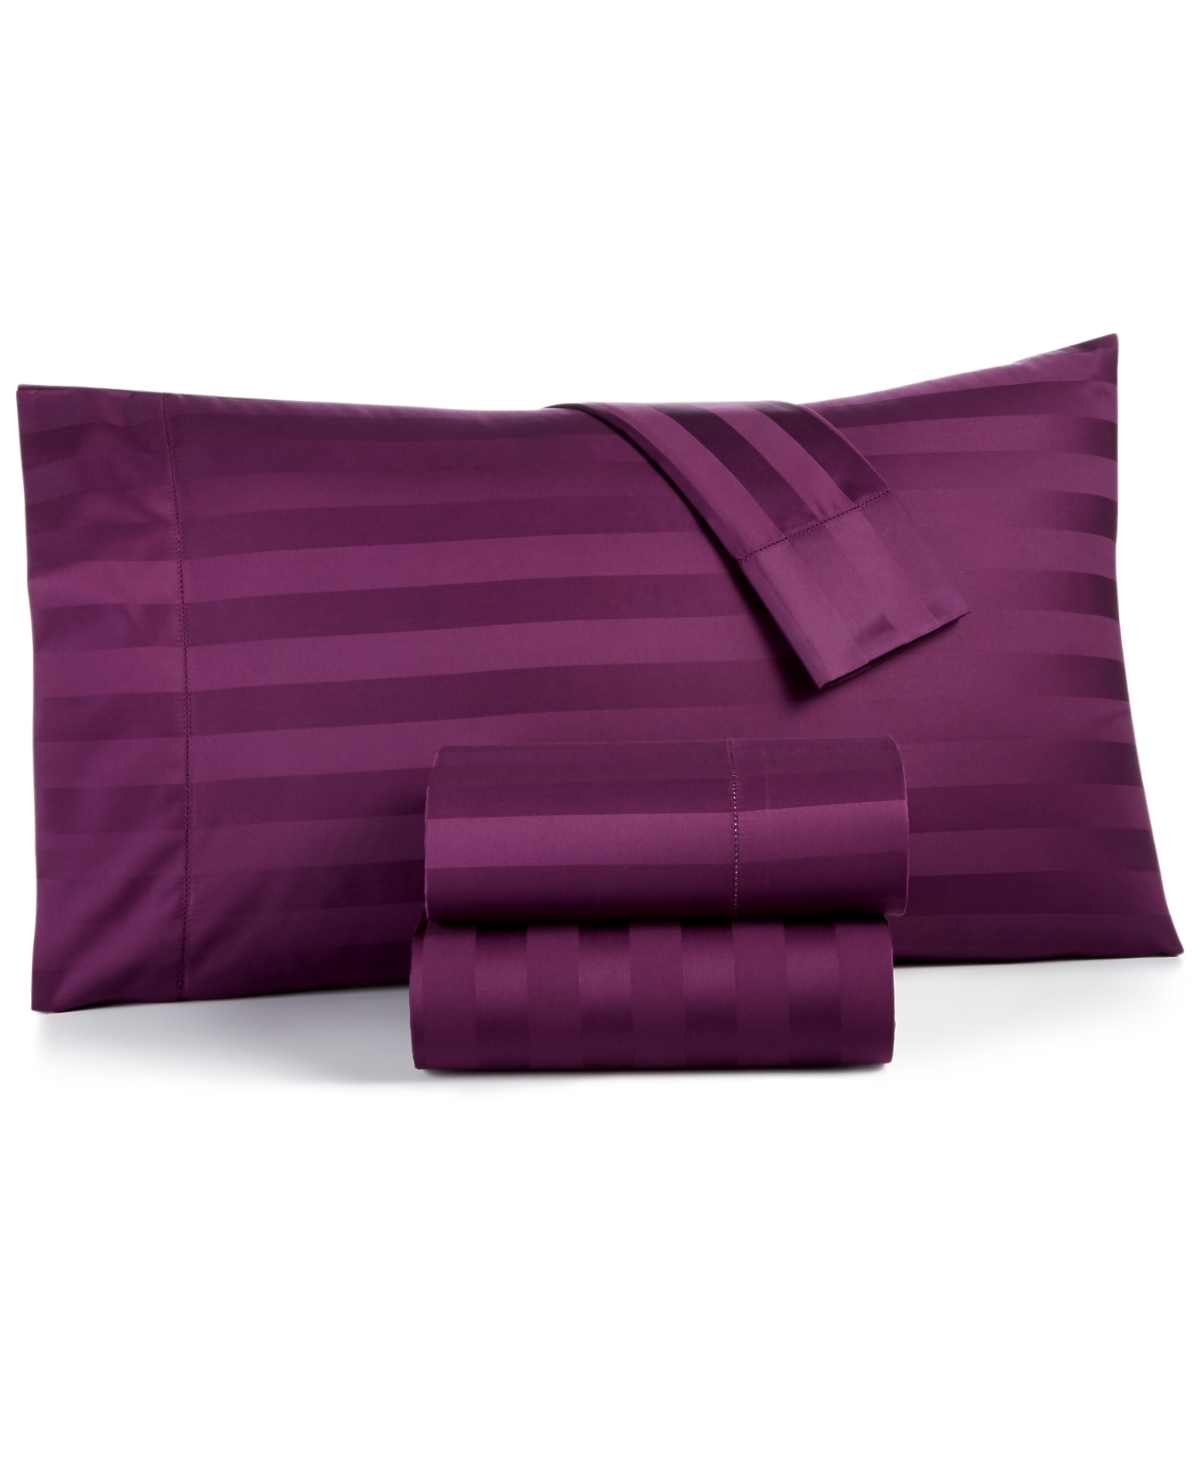 Charter Club Damask 1.5" Stripe 550 Thread Count 100% Cotton 3-pc. Sheet Set, Twin, Created For Macy's In Mulberry